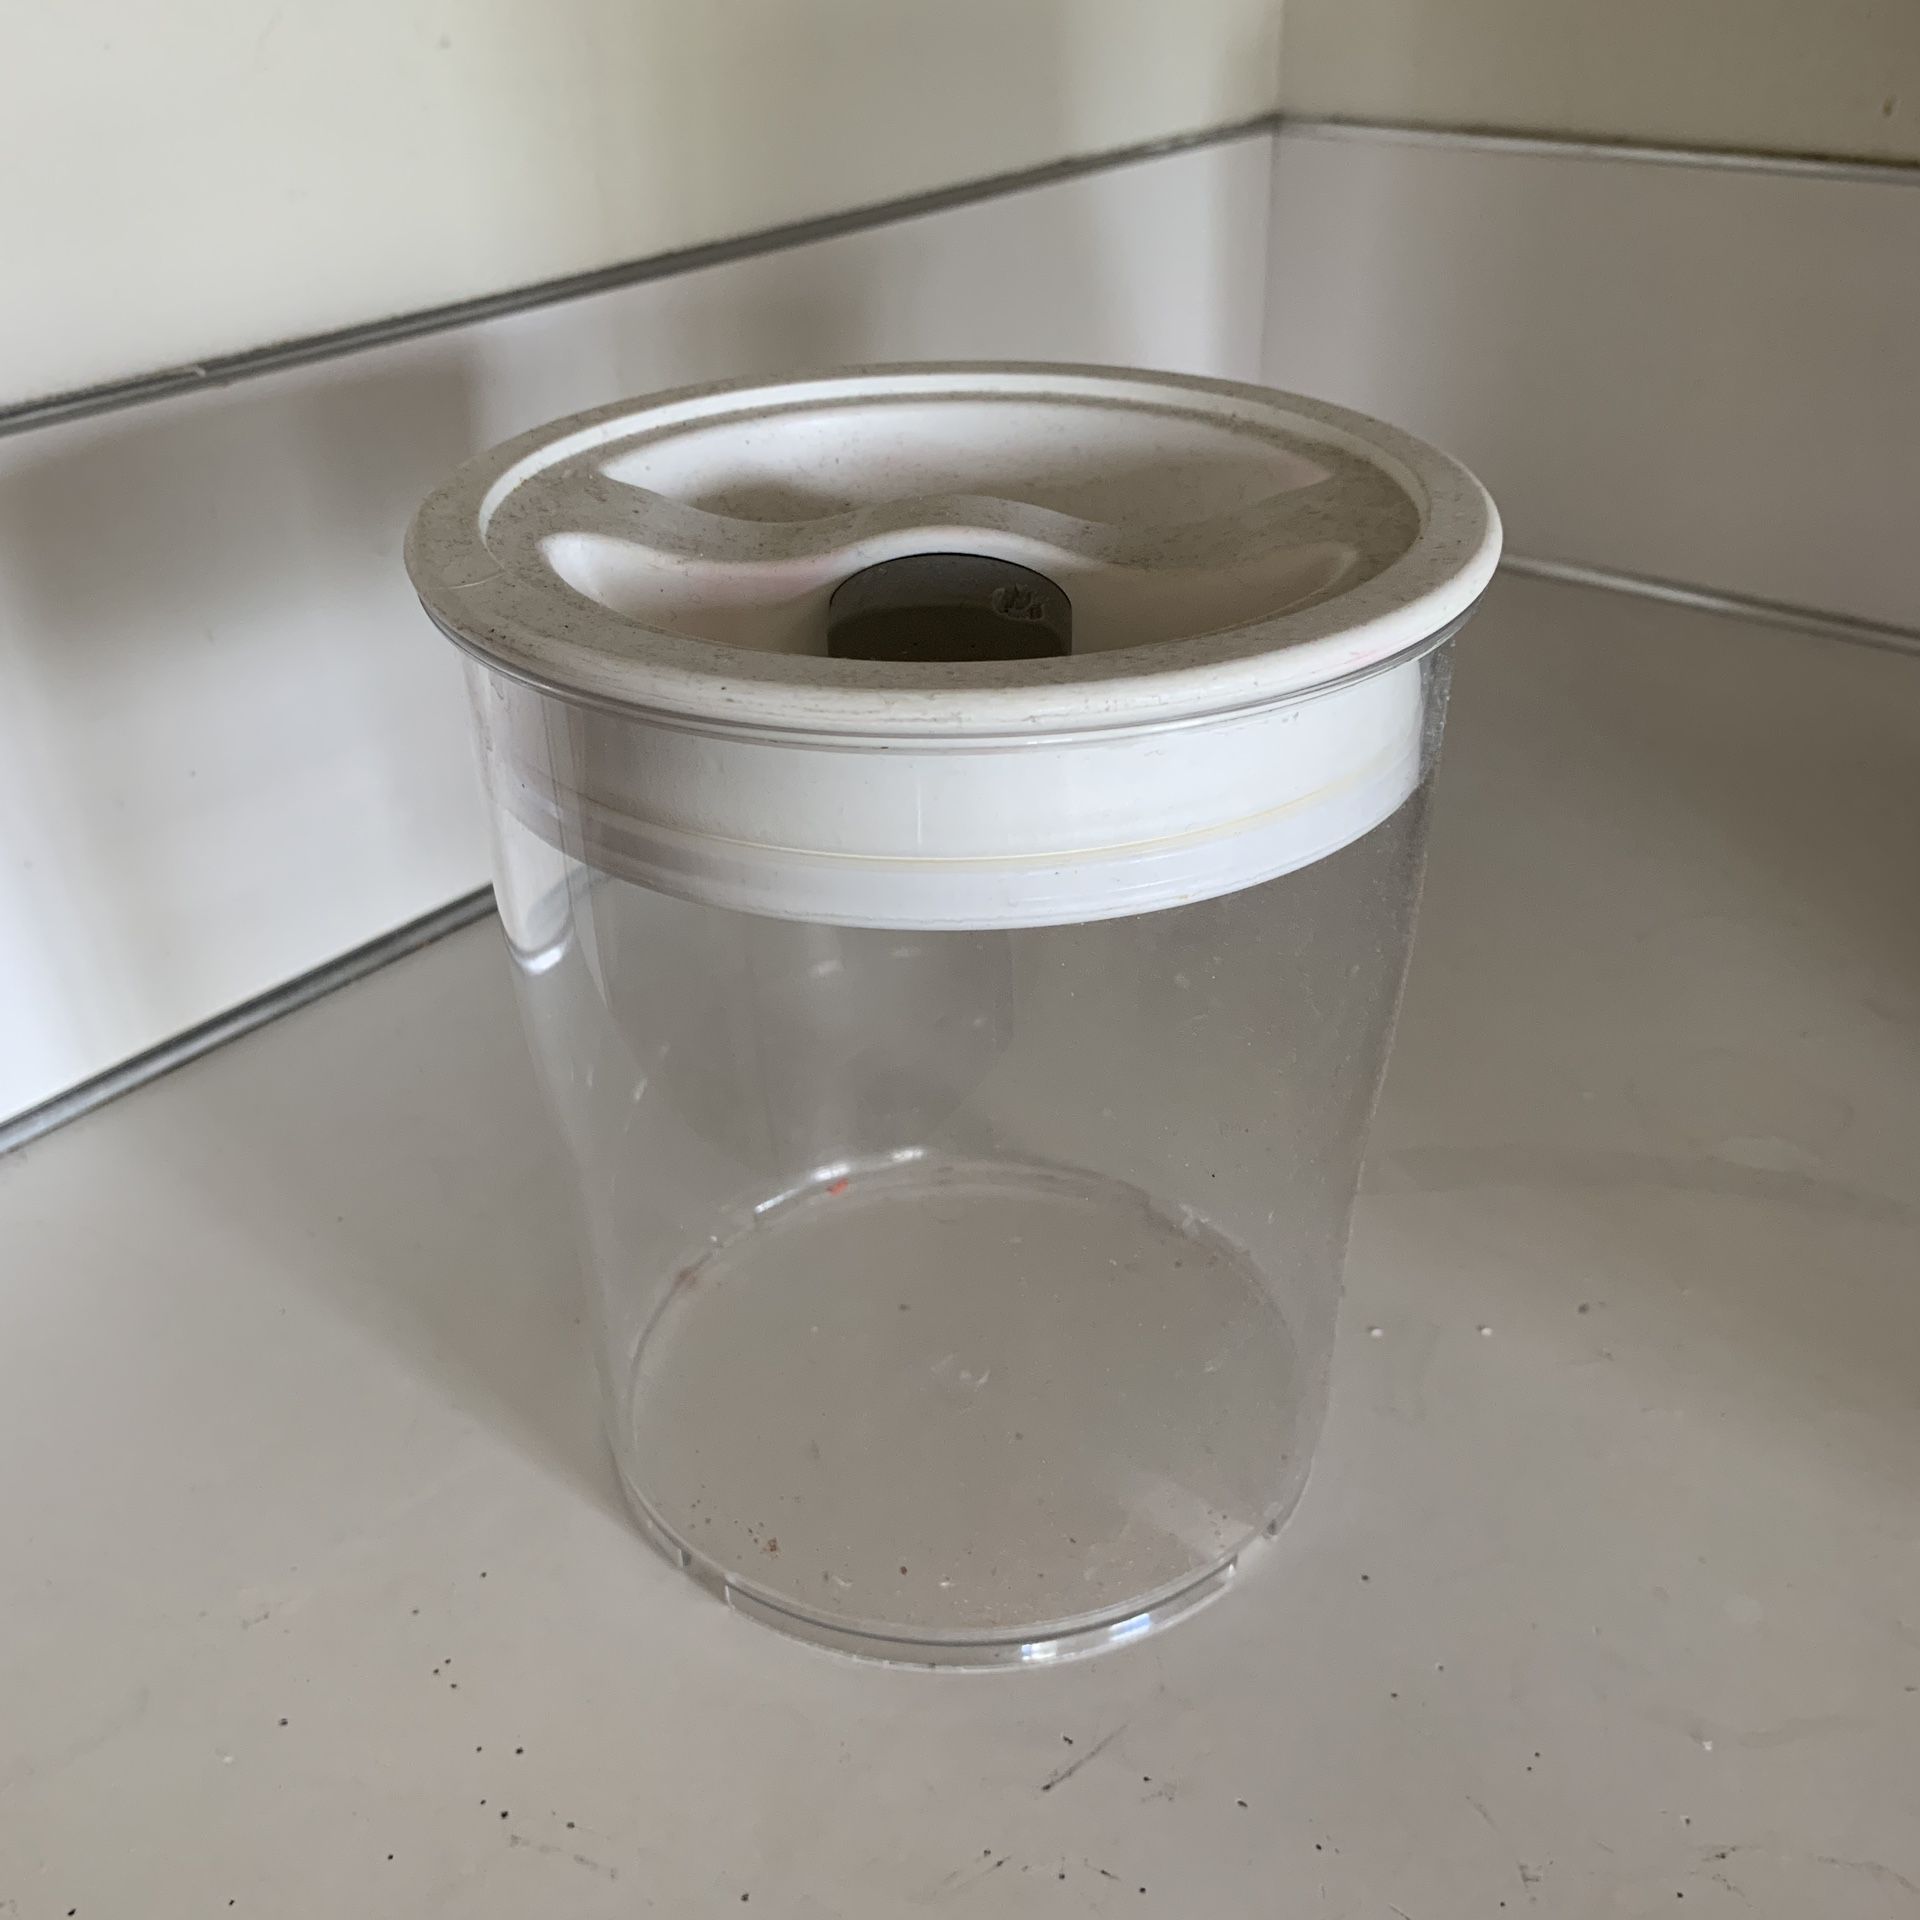 Food storage container. Plastic. Pick up in West Seattle. From non smoking and pet free home.